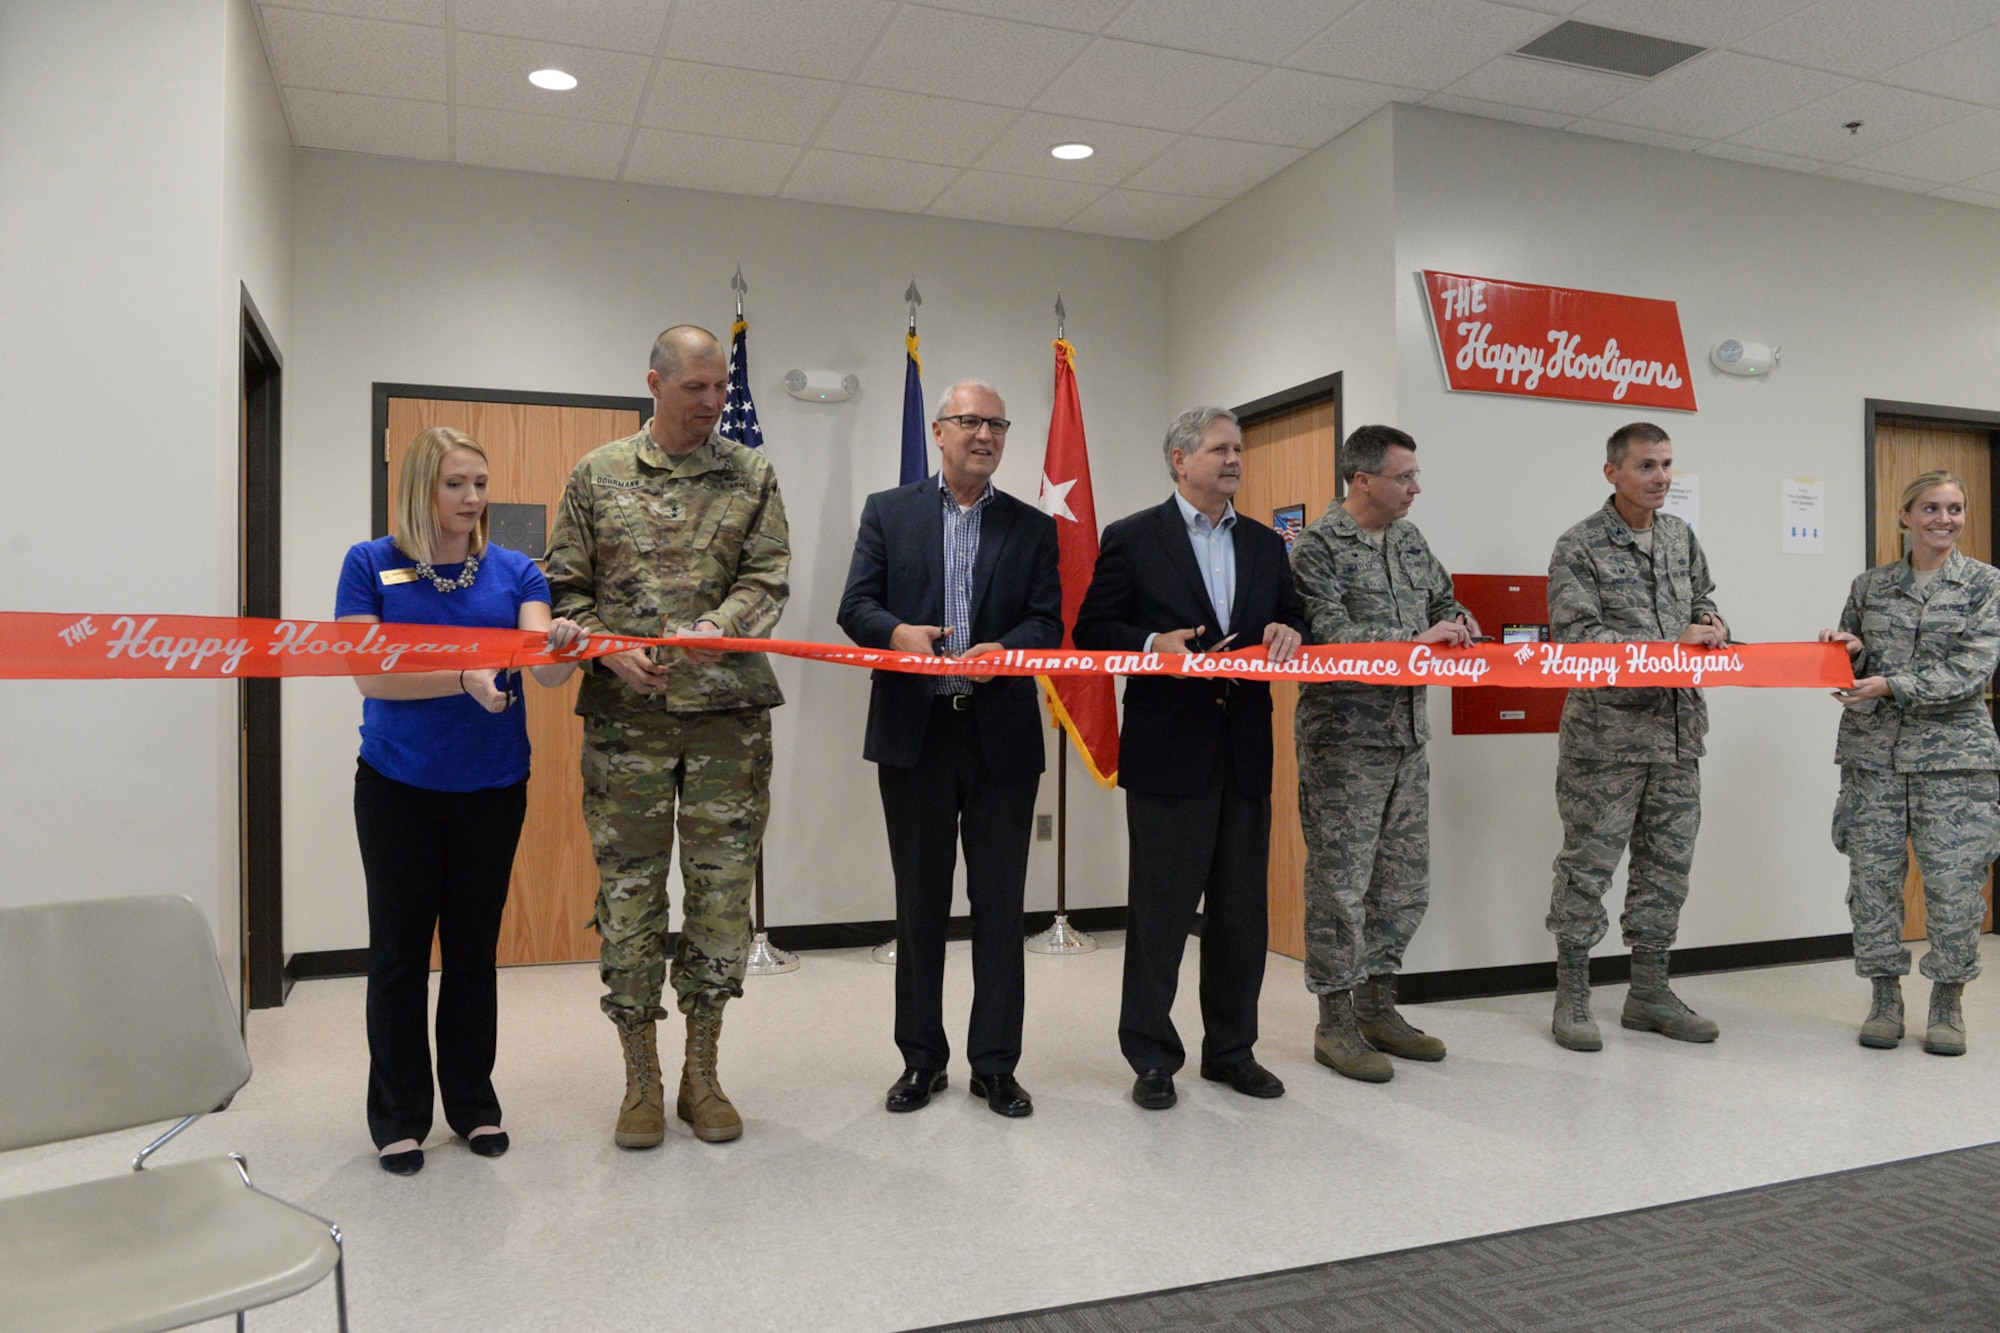 From left to right Megan Edwardson, Representative for Senator Heitkamp, Maj. Gen. Al Dohrmann, the N.D. Adjutant General, Kevin Cramer, US Congressman, Sen. John Hoeven, Col. Britt Hatley, the 119th Wing commander,
Col Darrin Anderson, the 119th Intelligence, Surveillance and Reconnaissance (ISRG) Group commander, and Staff Sgt. Tracy Woodbury prepare to cut a symbolic ribbon at a building dedication ceremony for the new ISRG building
at the North Dakota Air National Guard Base, Fargo, N.D., Sept. 22, 2017